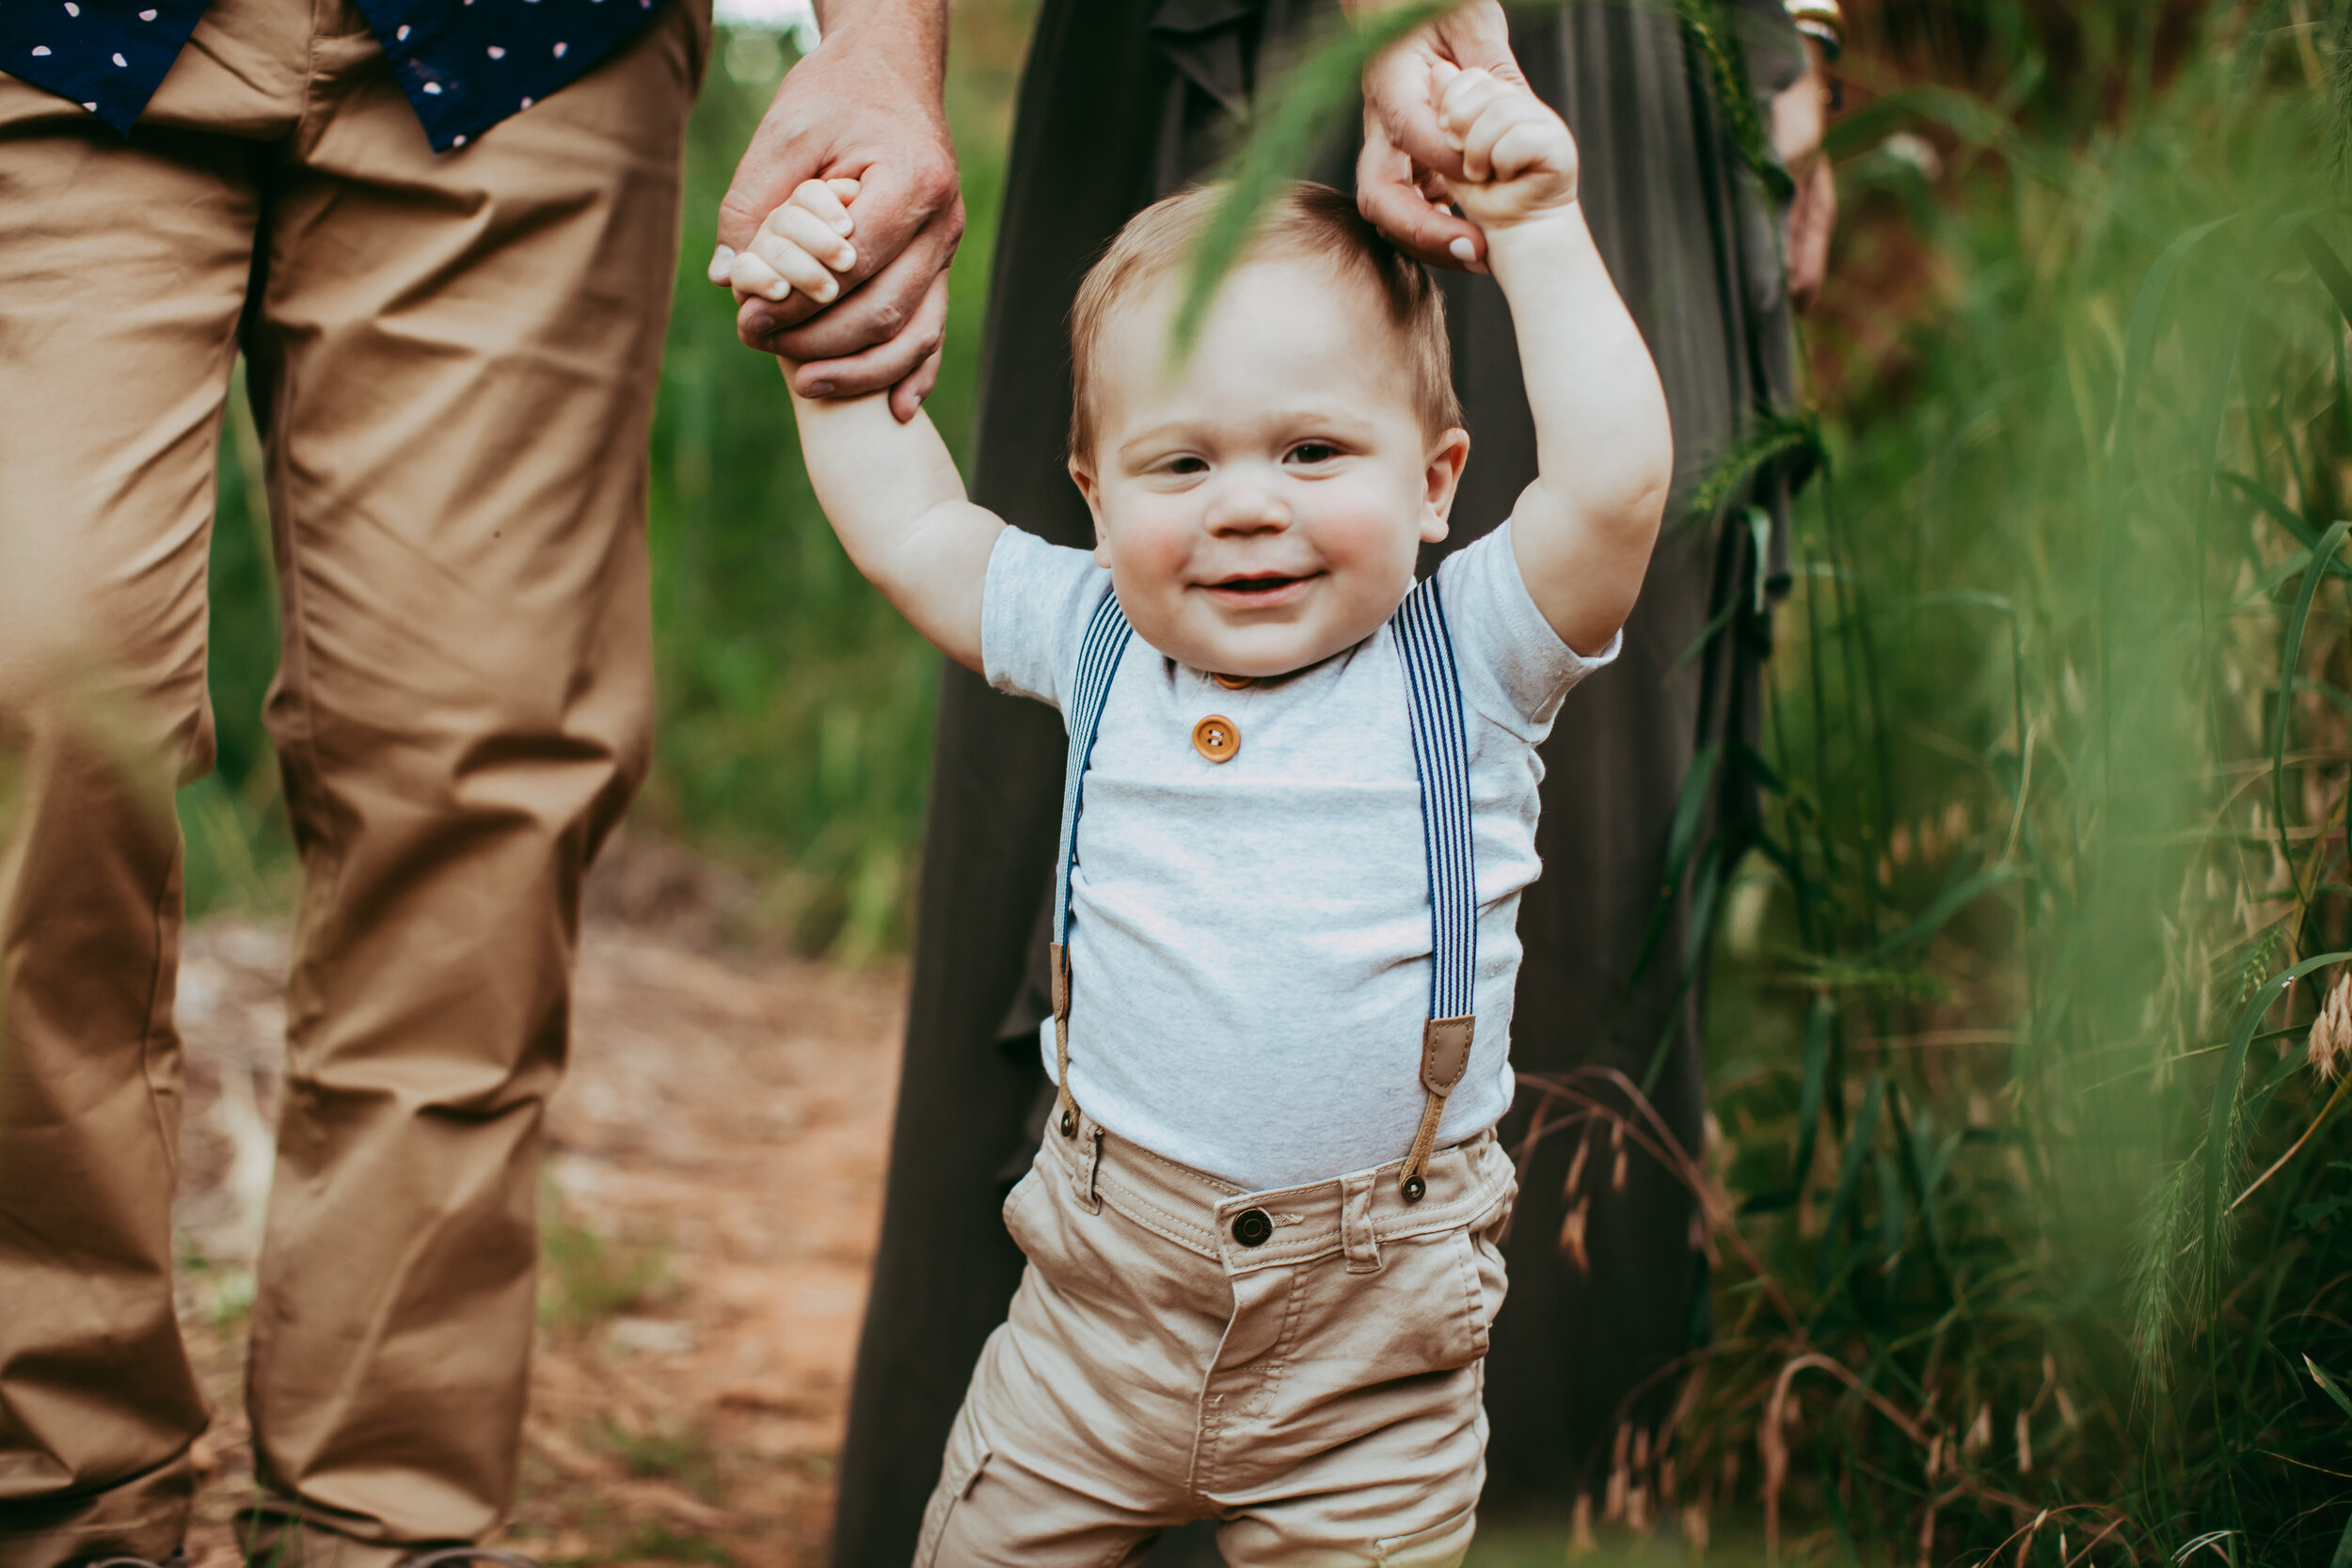  Parents helping little one walk down the path is such a metaphor for life #tealawardphotography #texasfamilyphotographer #amarillophotographer #amarillofamilyphotographer #lifestylephotography #emotionalphotography #familyphotoshoot #family #lovingsiblings #purejoy #familyphotos #naturalfamilyinteraction 